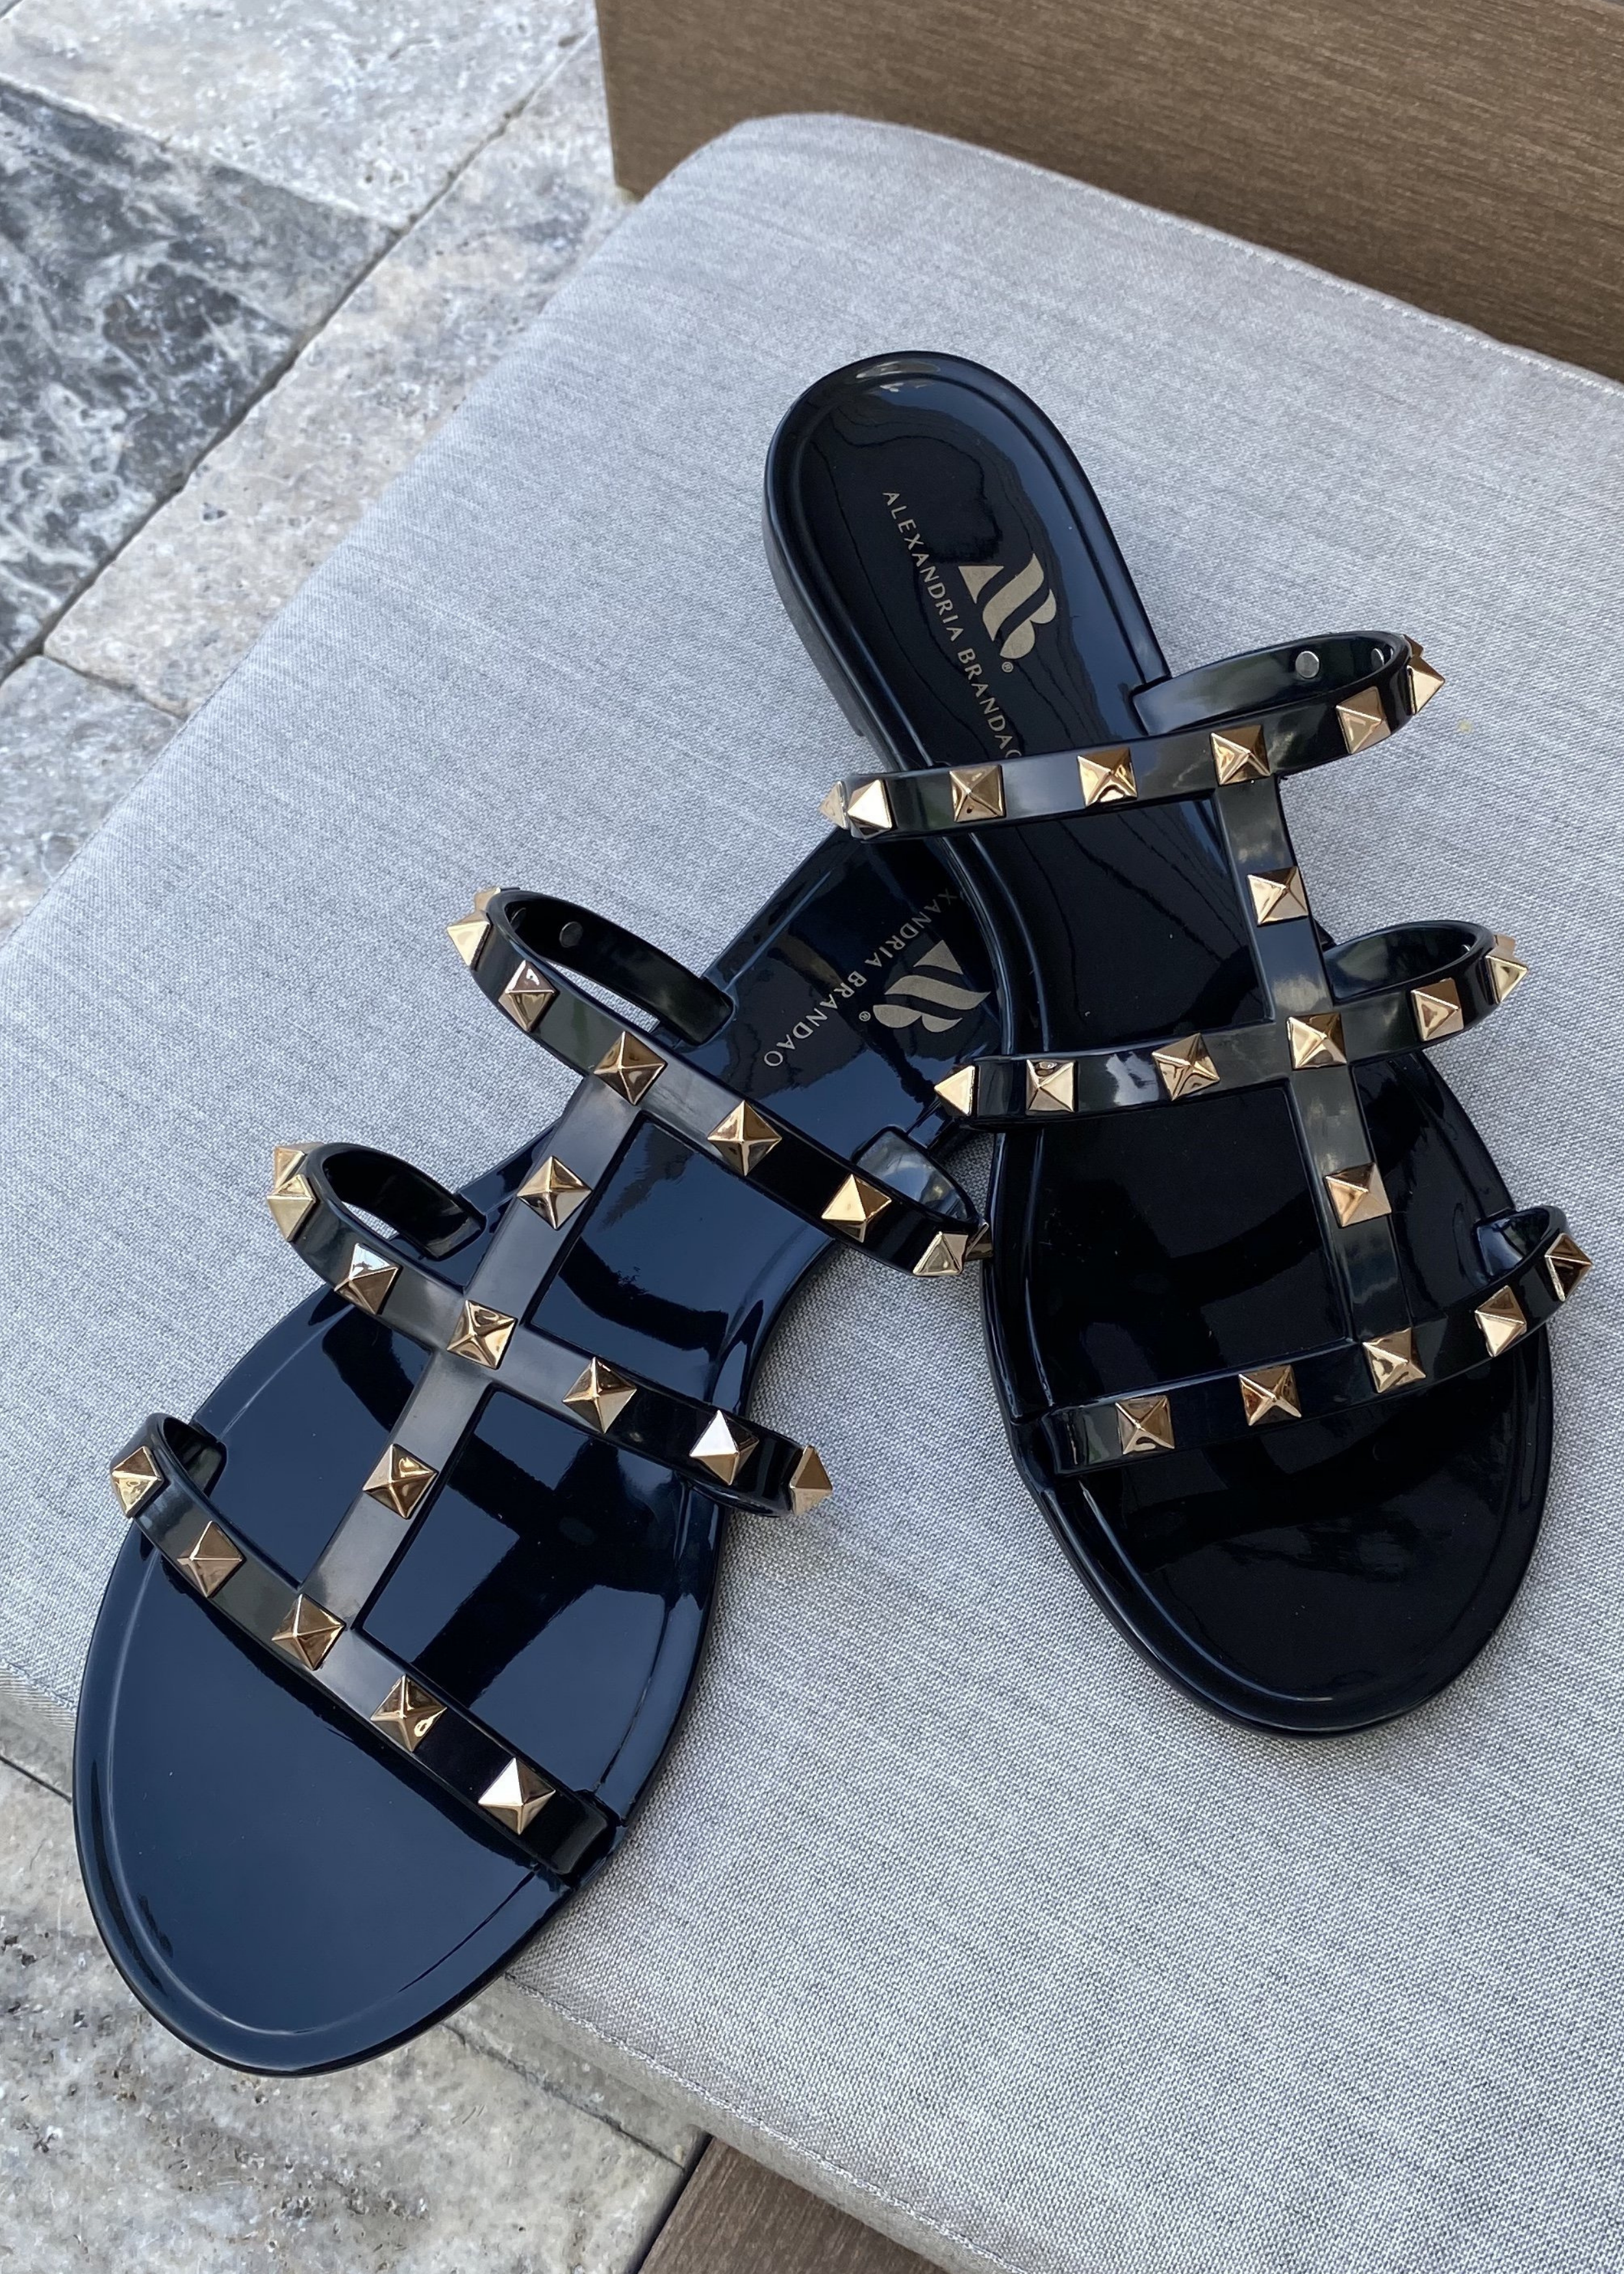 Aurora Black Jelly sandal that has  Gold Studs on all straps and is a slip on sandal.  Sandal has three equally separated horizontal straps that goes all the way to top of the bridge of the foot and one strap in the middle connecting all straps